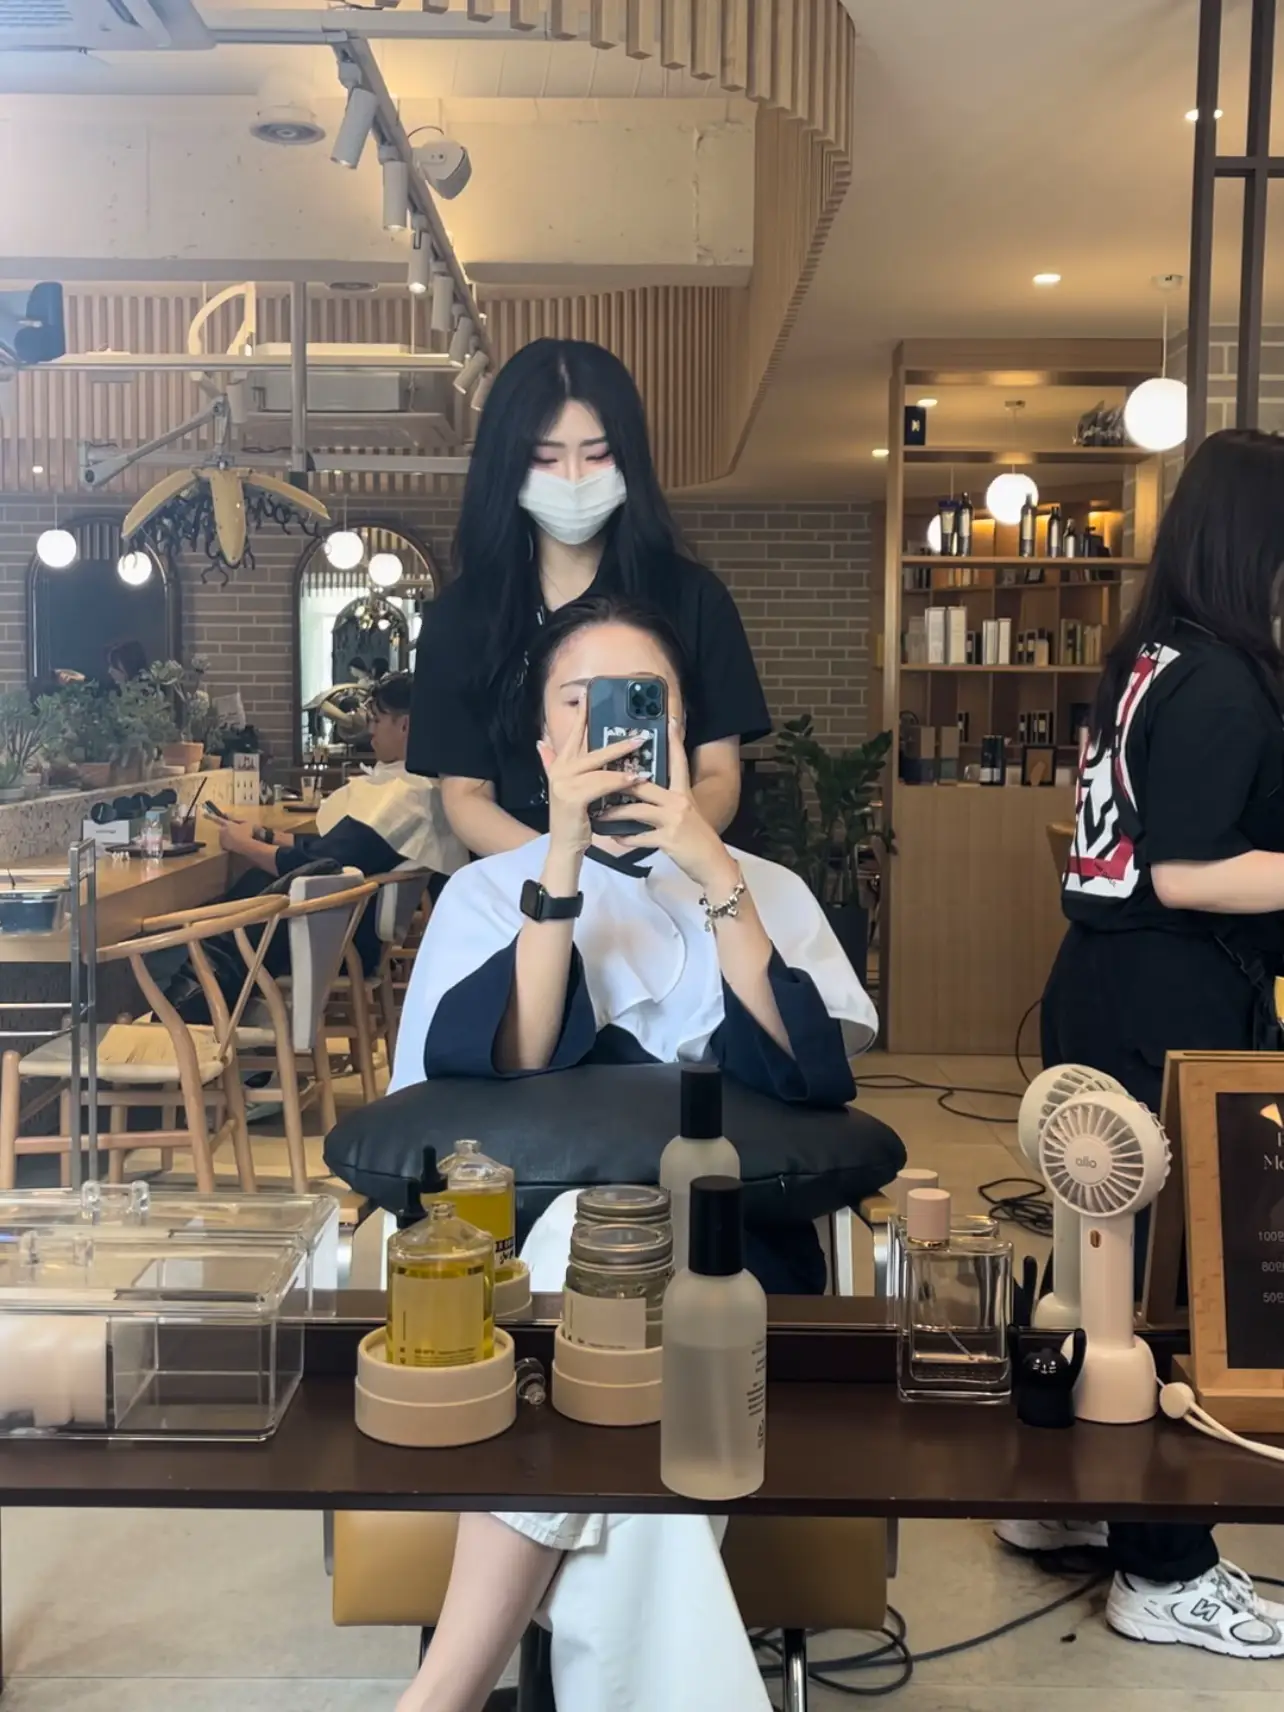 getting my hair done for the first time in korea💇🏻‍♀️🇰🇷's images(4)